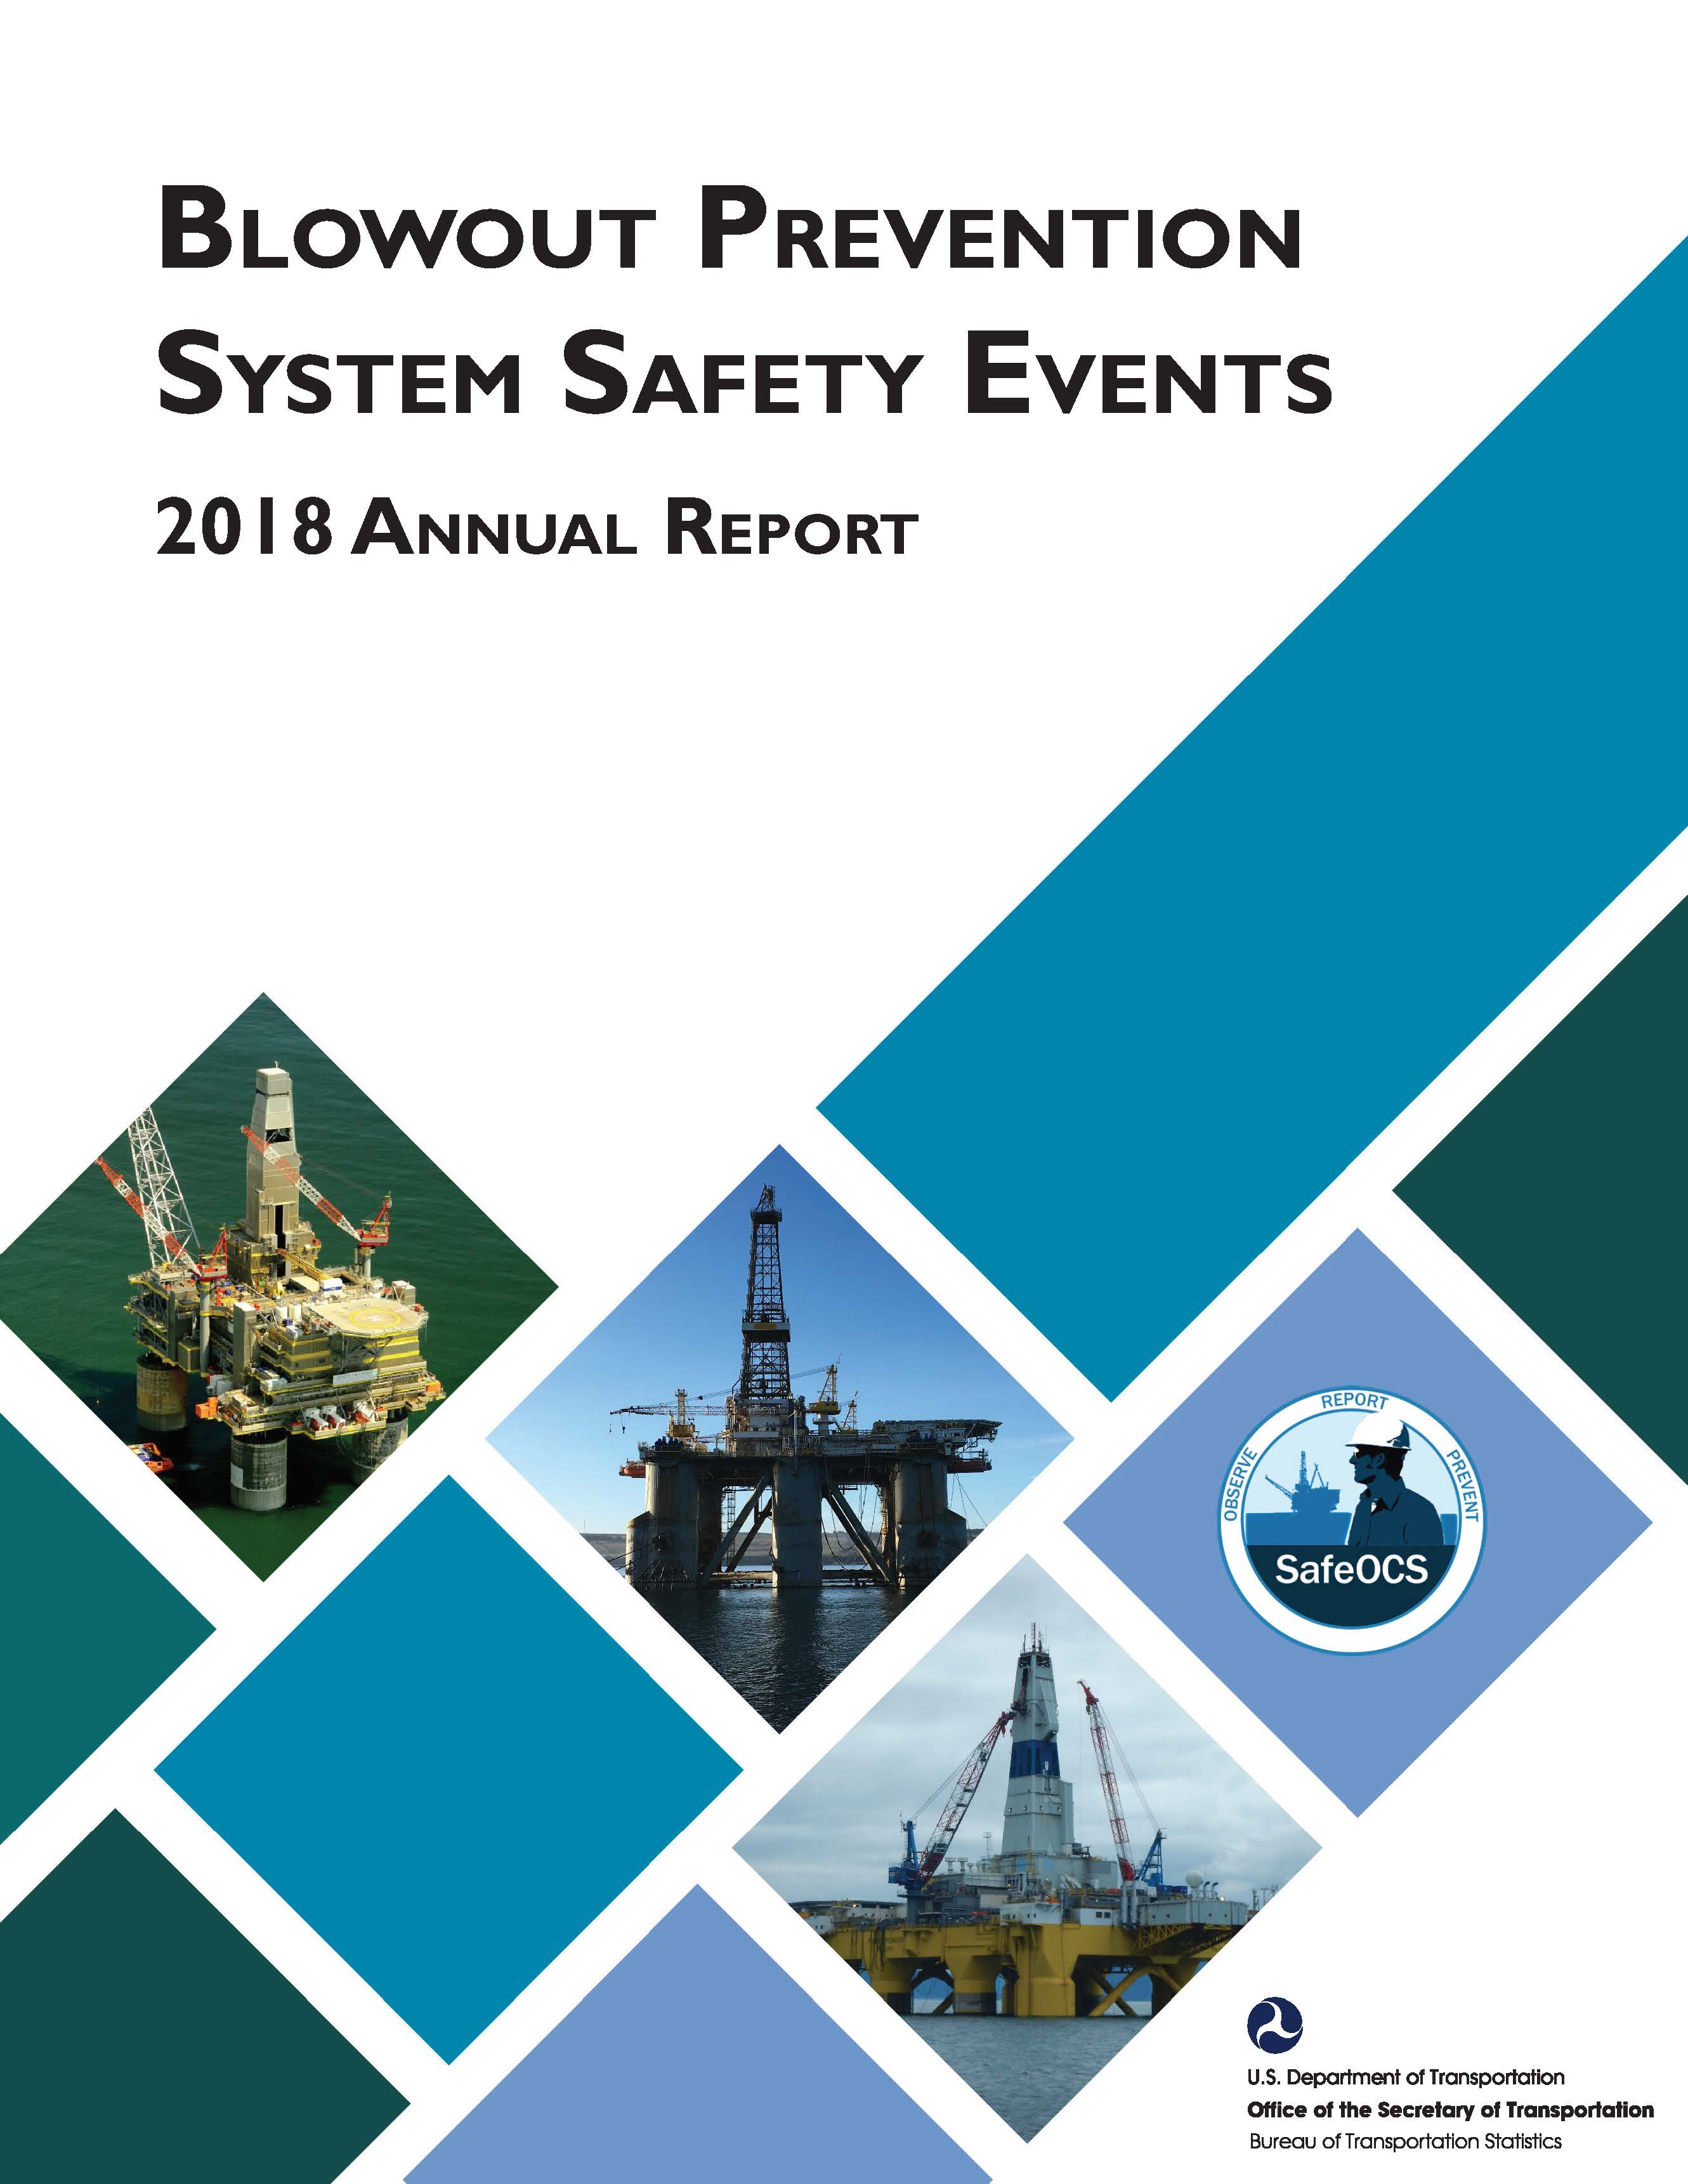 2018 SafeOCS WCE annual report download link